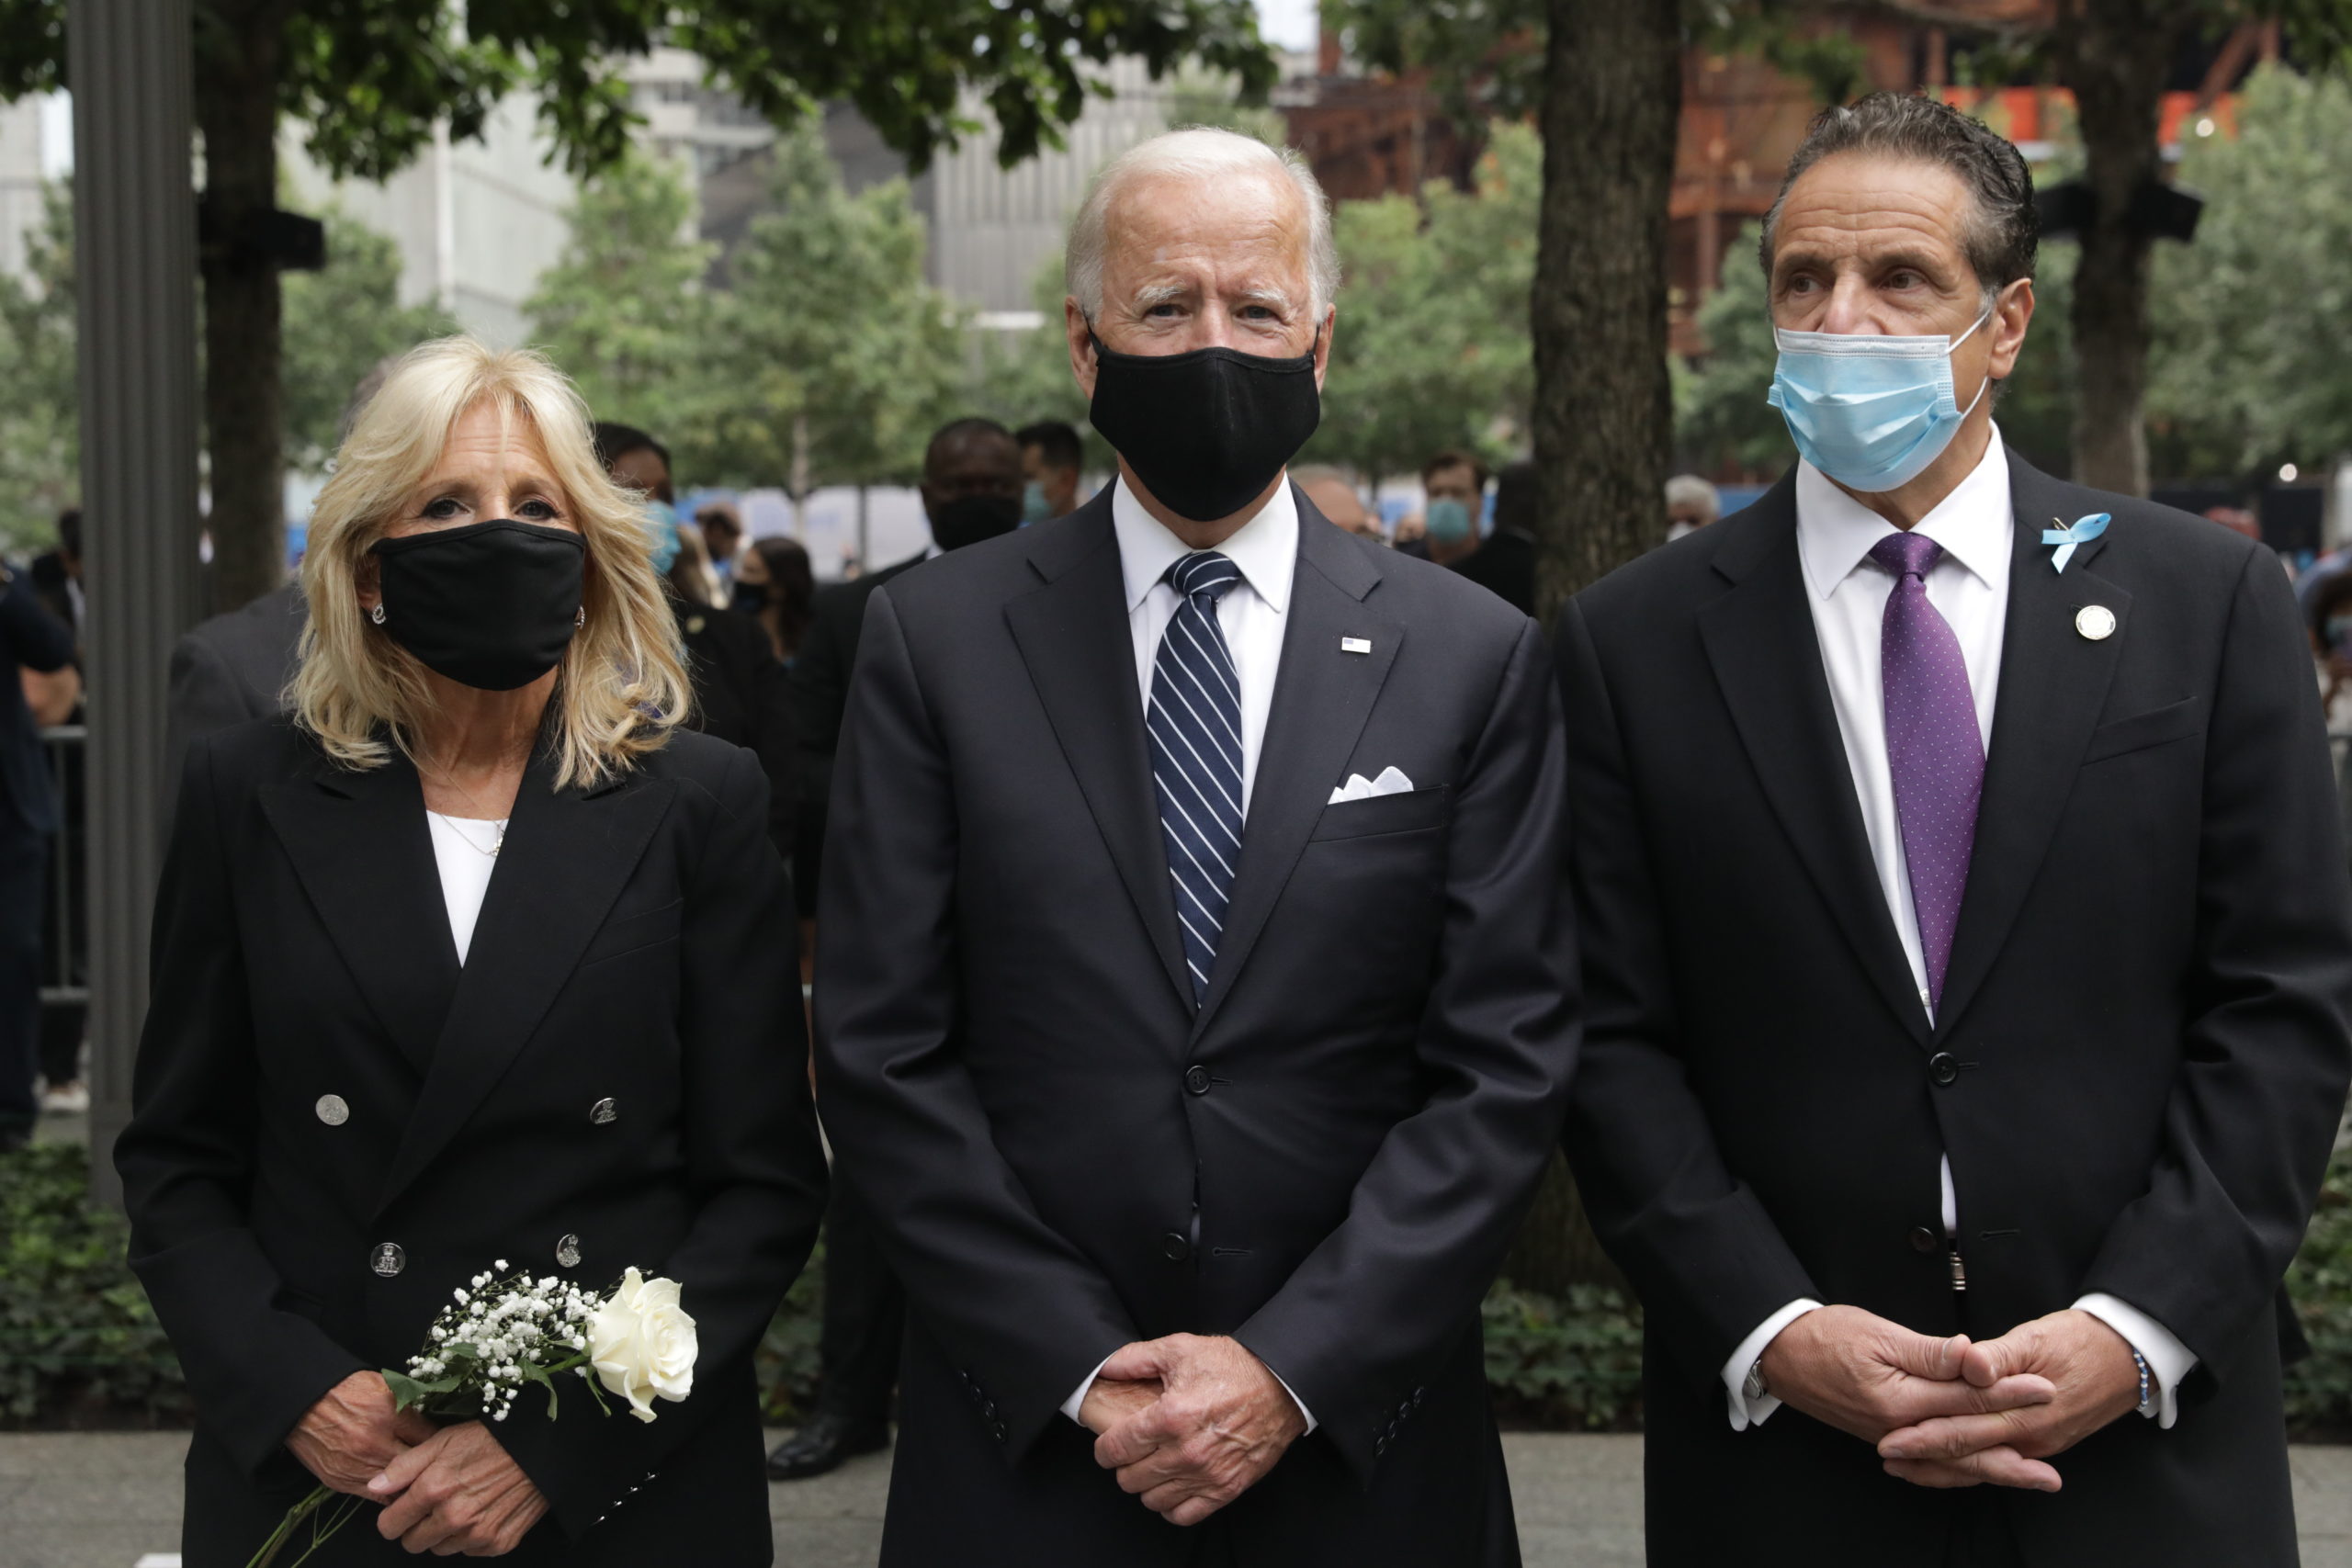 NEW YORK, NEW YORK - SEPTEMBER 11: Democratic presidential nominee Joe Biden (center), Dr. Jill Biden (left) and New York Gov. Andrew Cuomo (right) attend a 9/11 memorial service at the National September 11 Memorial and Museum on September 11, 2020 in New York City.  (Photo by Amr Alfiky - Pool/Getty Images)